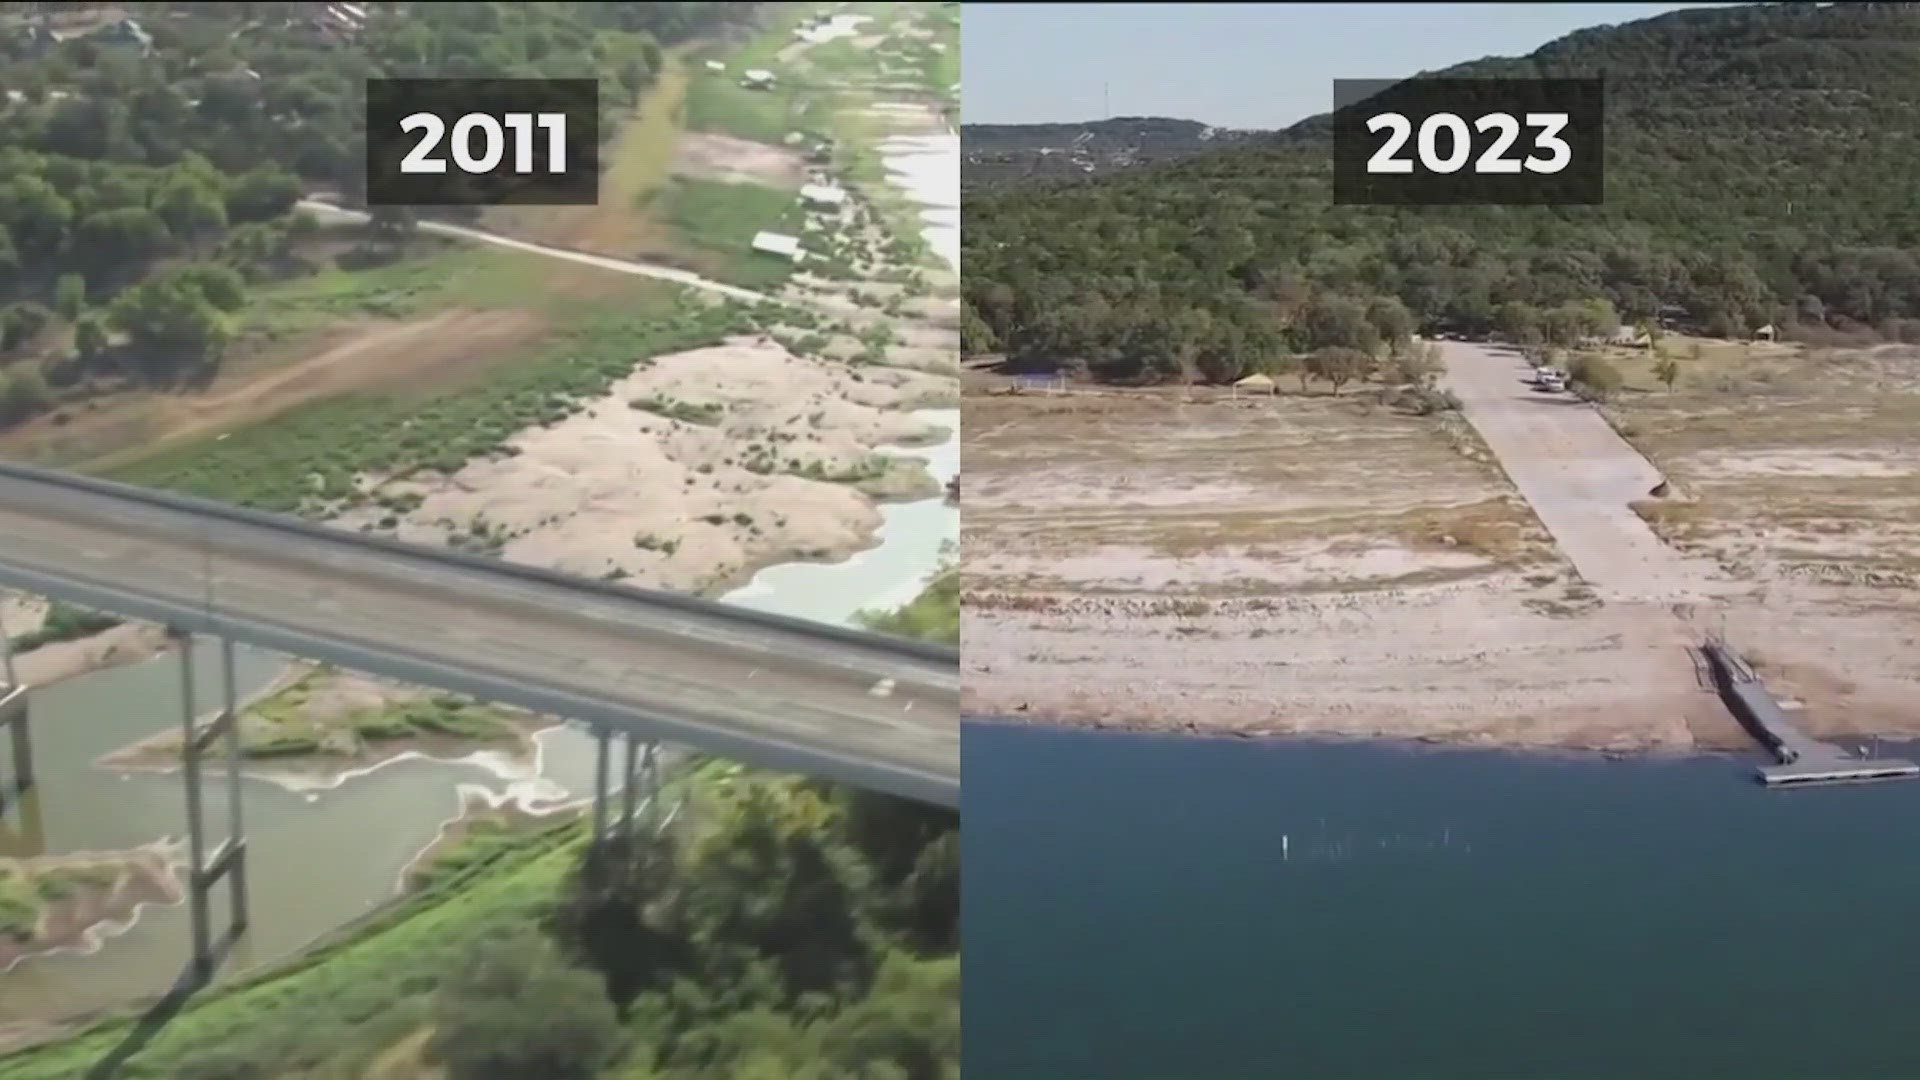 Is the current Central Texas drought worse than the one in 2011?